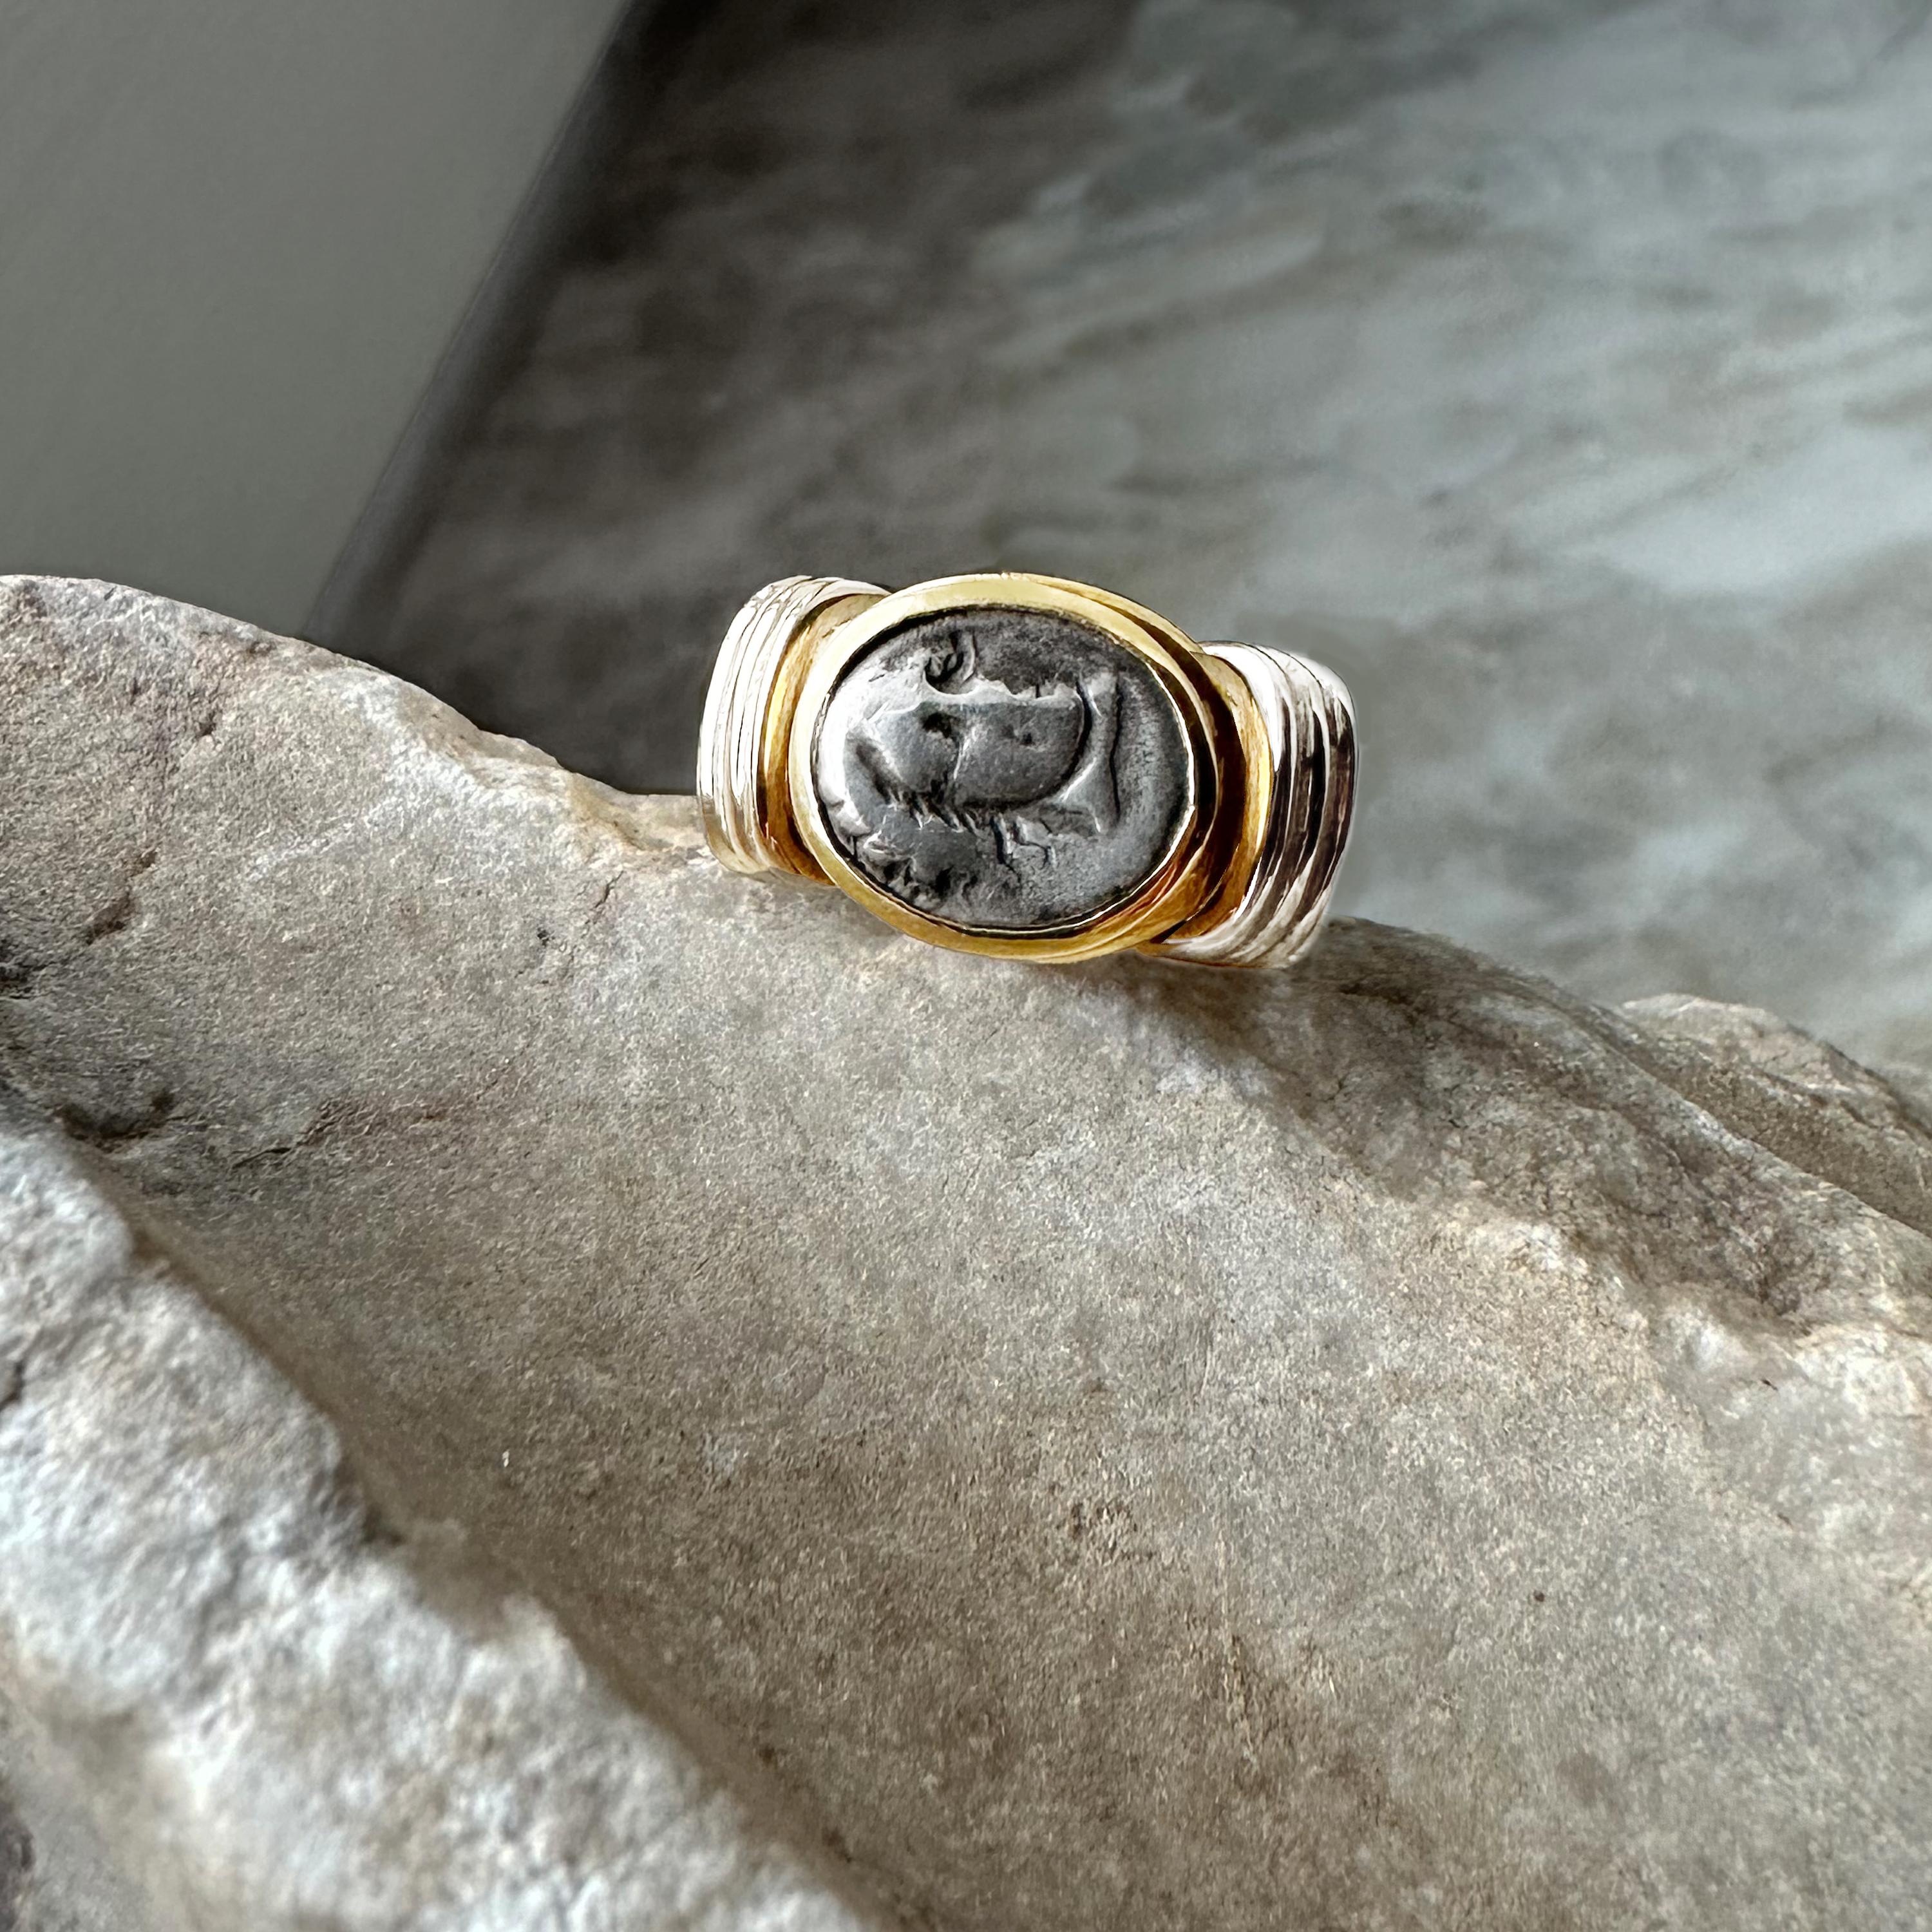 In this 18 Kt gold ring there is mounted an authentic silver coin ( 4th century B.C.) depicting Helios; in the other side of the coin there is a Rose.

Helios (identified with Apollo) was adopted as the patron diety of Rhodes upon the city's